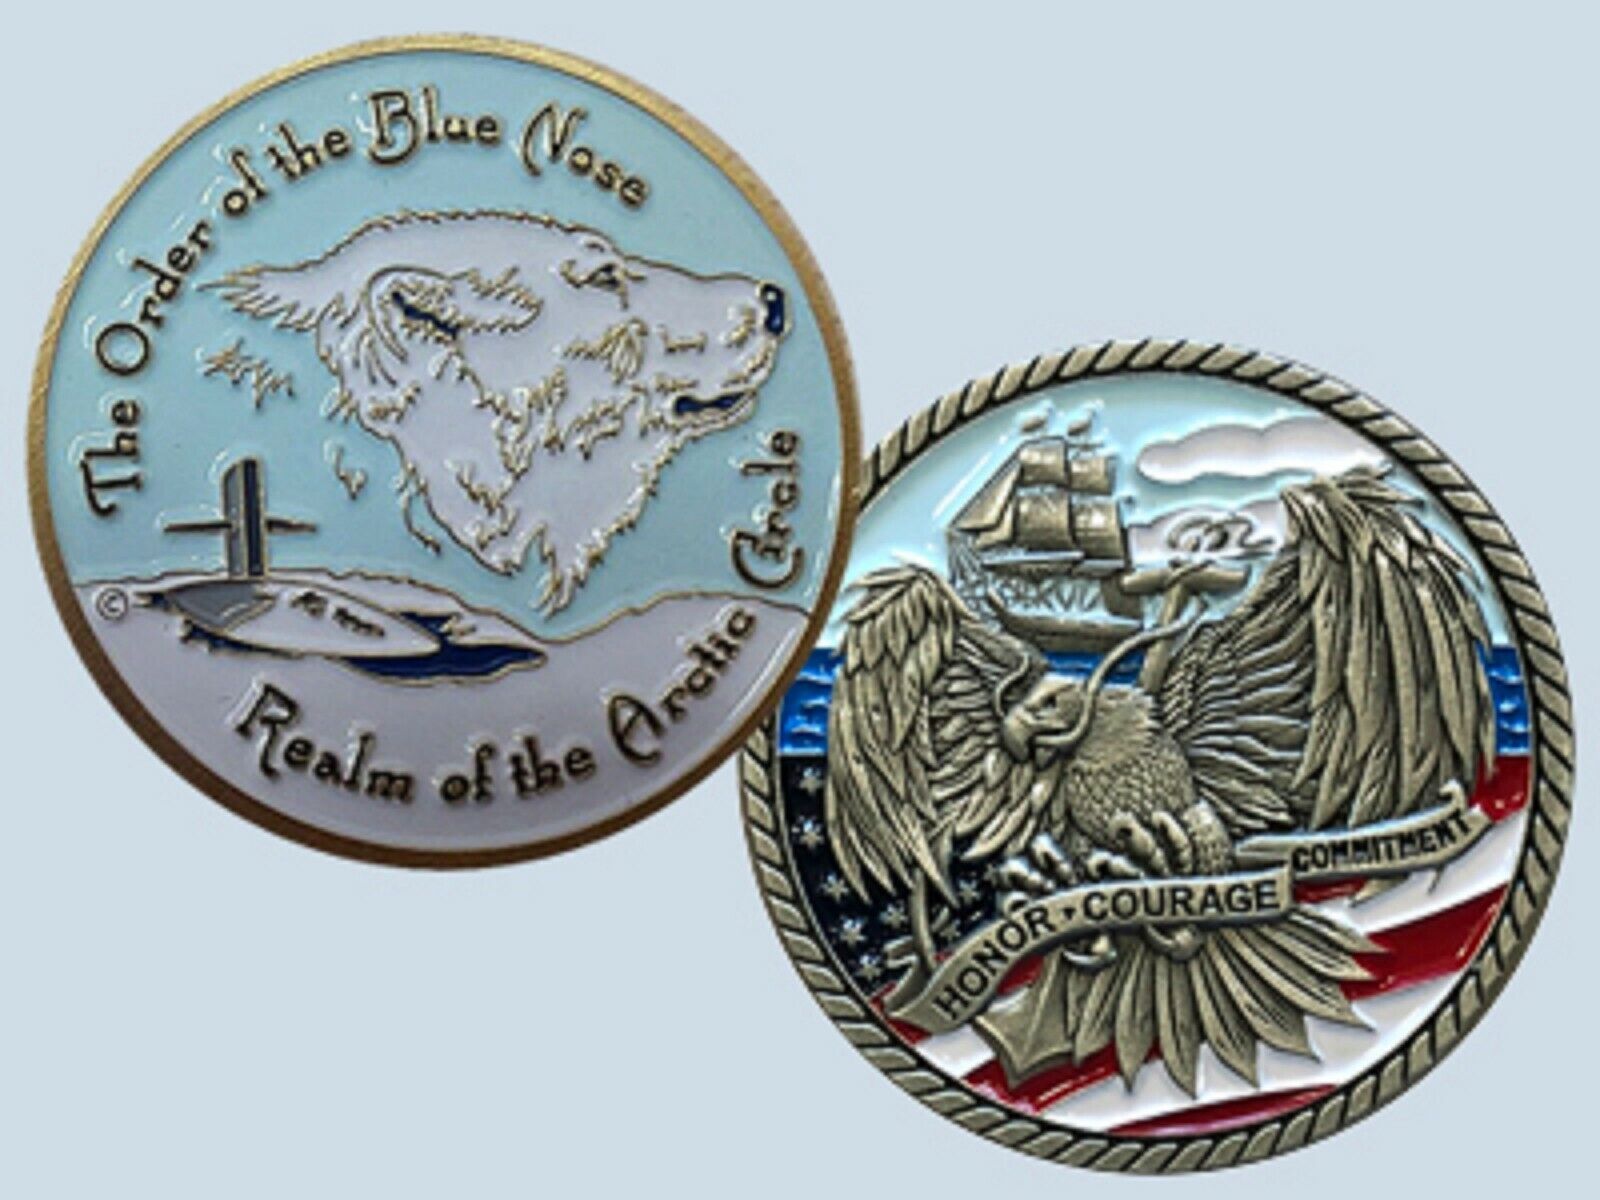 NAVY ORDER OF THE BLUE NOSE REALM OF THE ARCTIC CIRCLE CHALLENGE COIN